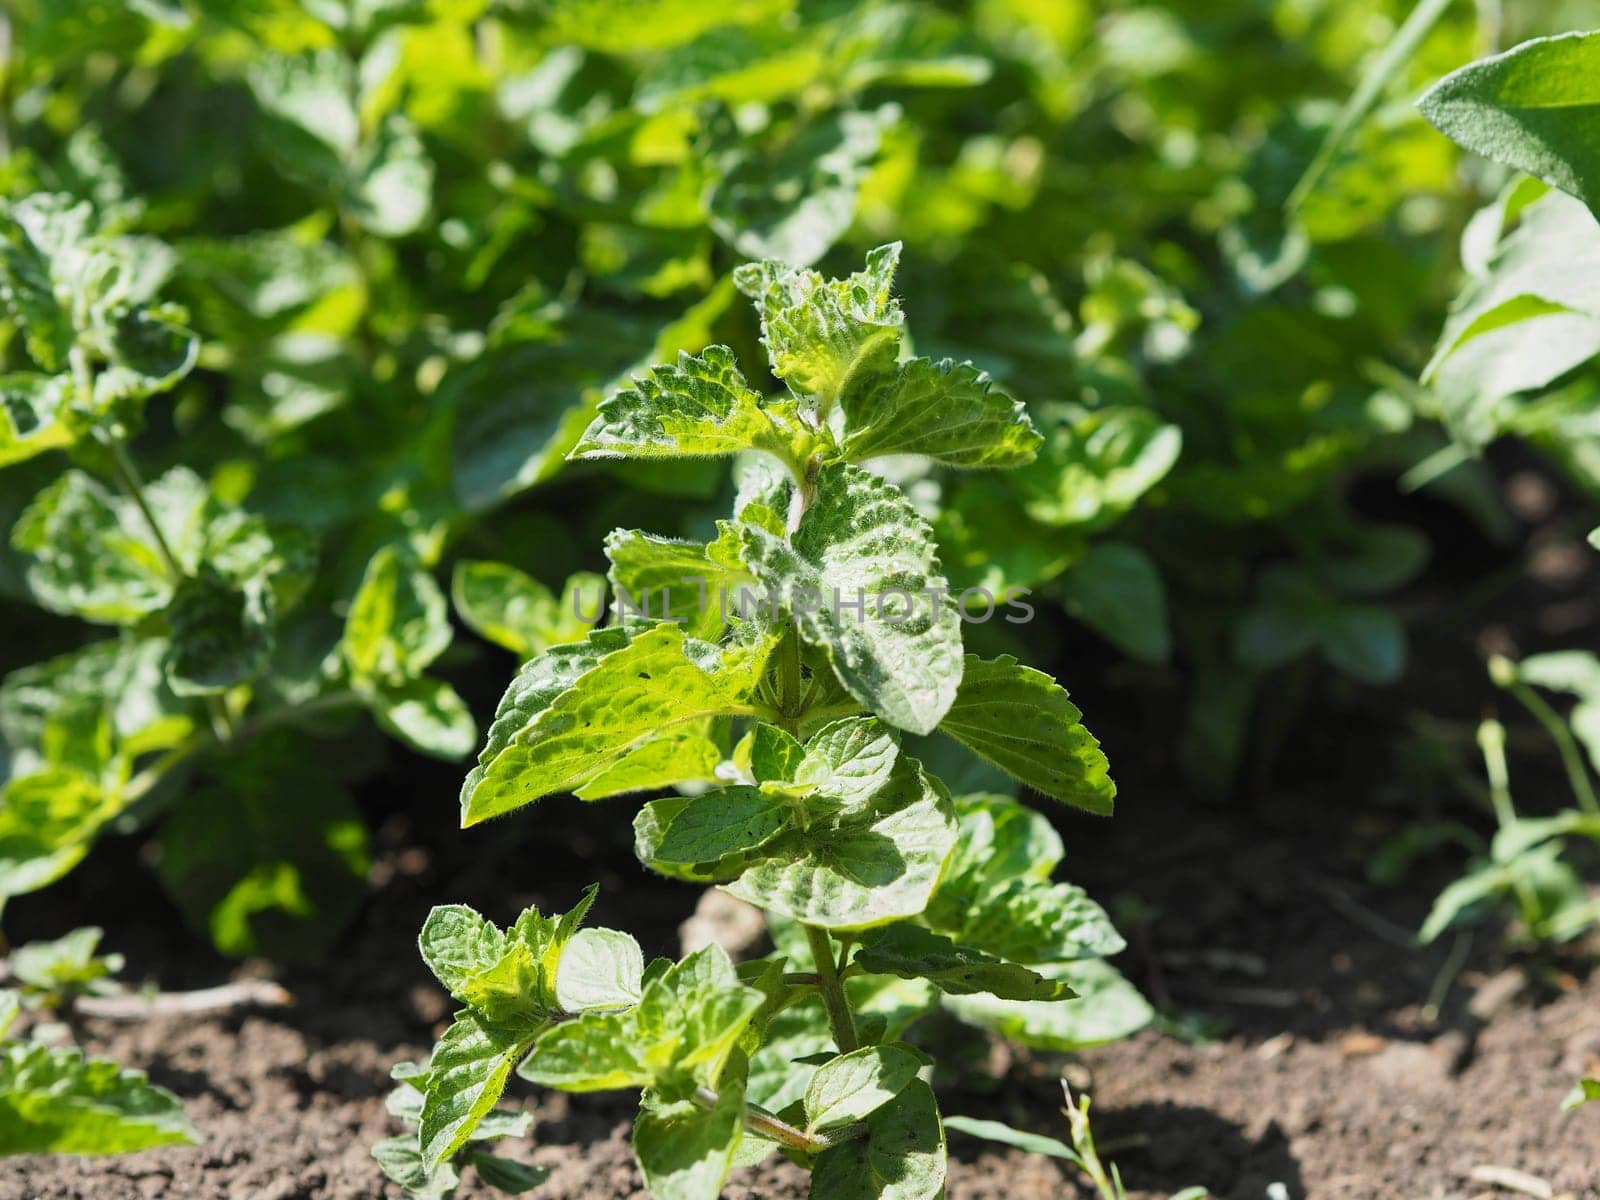 Fresh mint grows in the ground. Green leaves of a mint plant in the garden. Useful plant harvest.